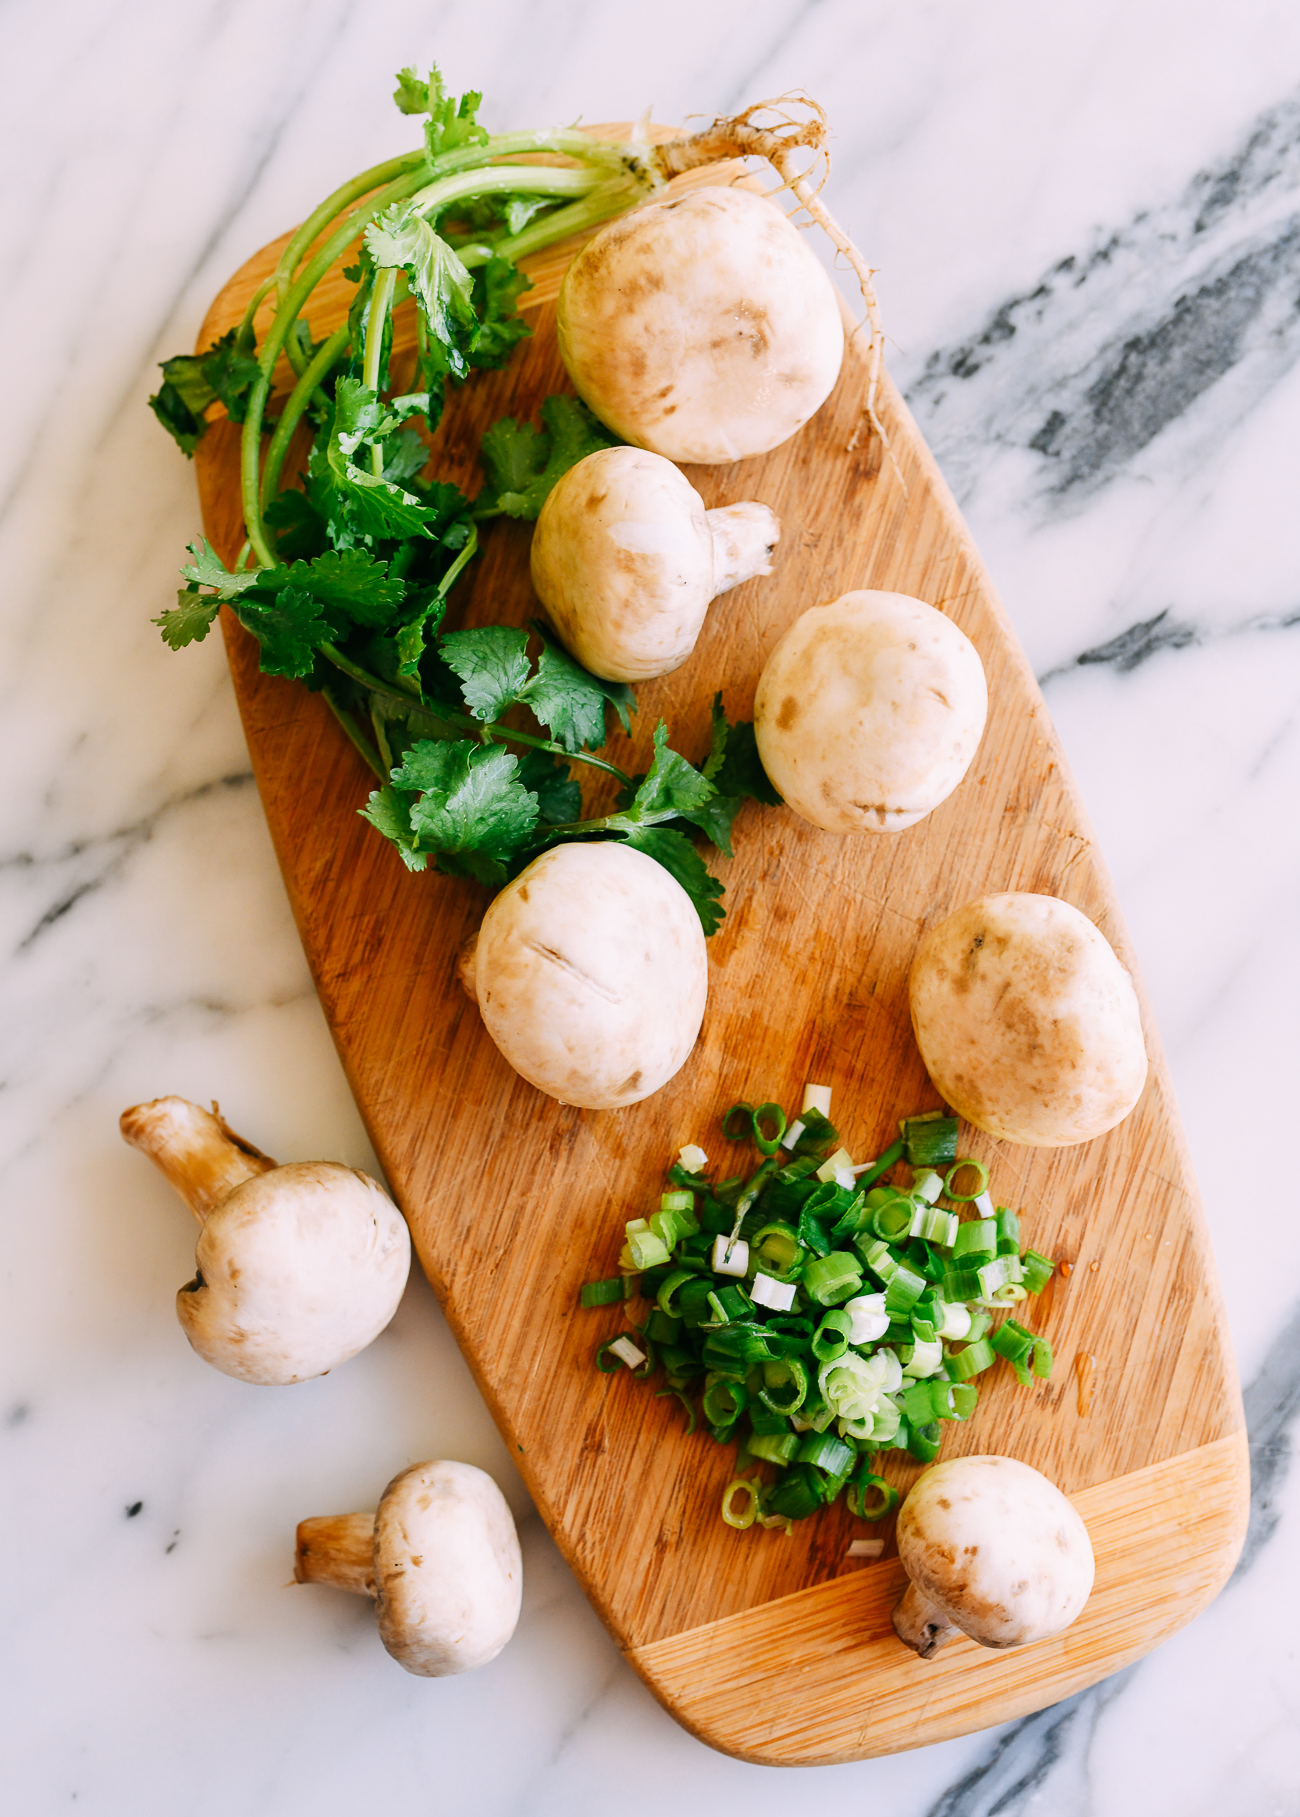 White button mushrooms and herbs on cutting board